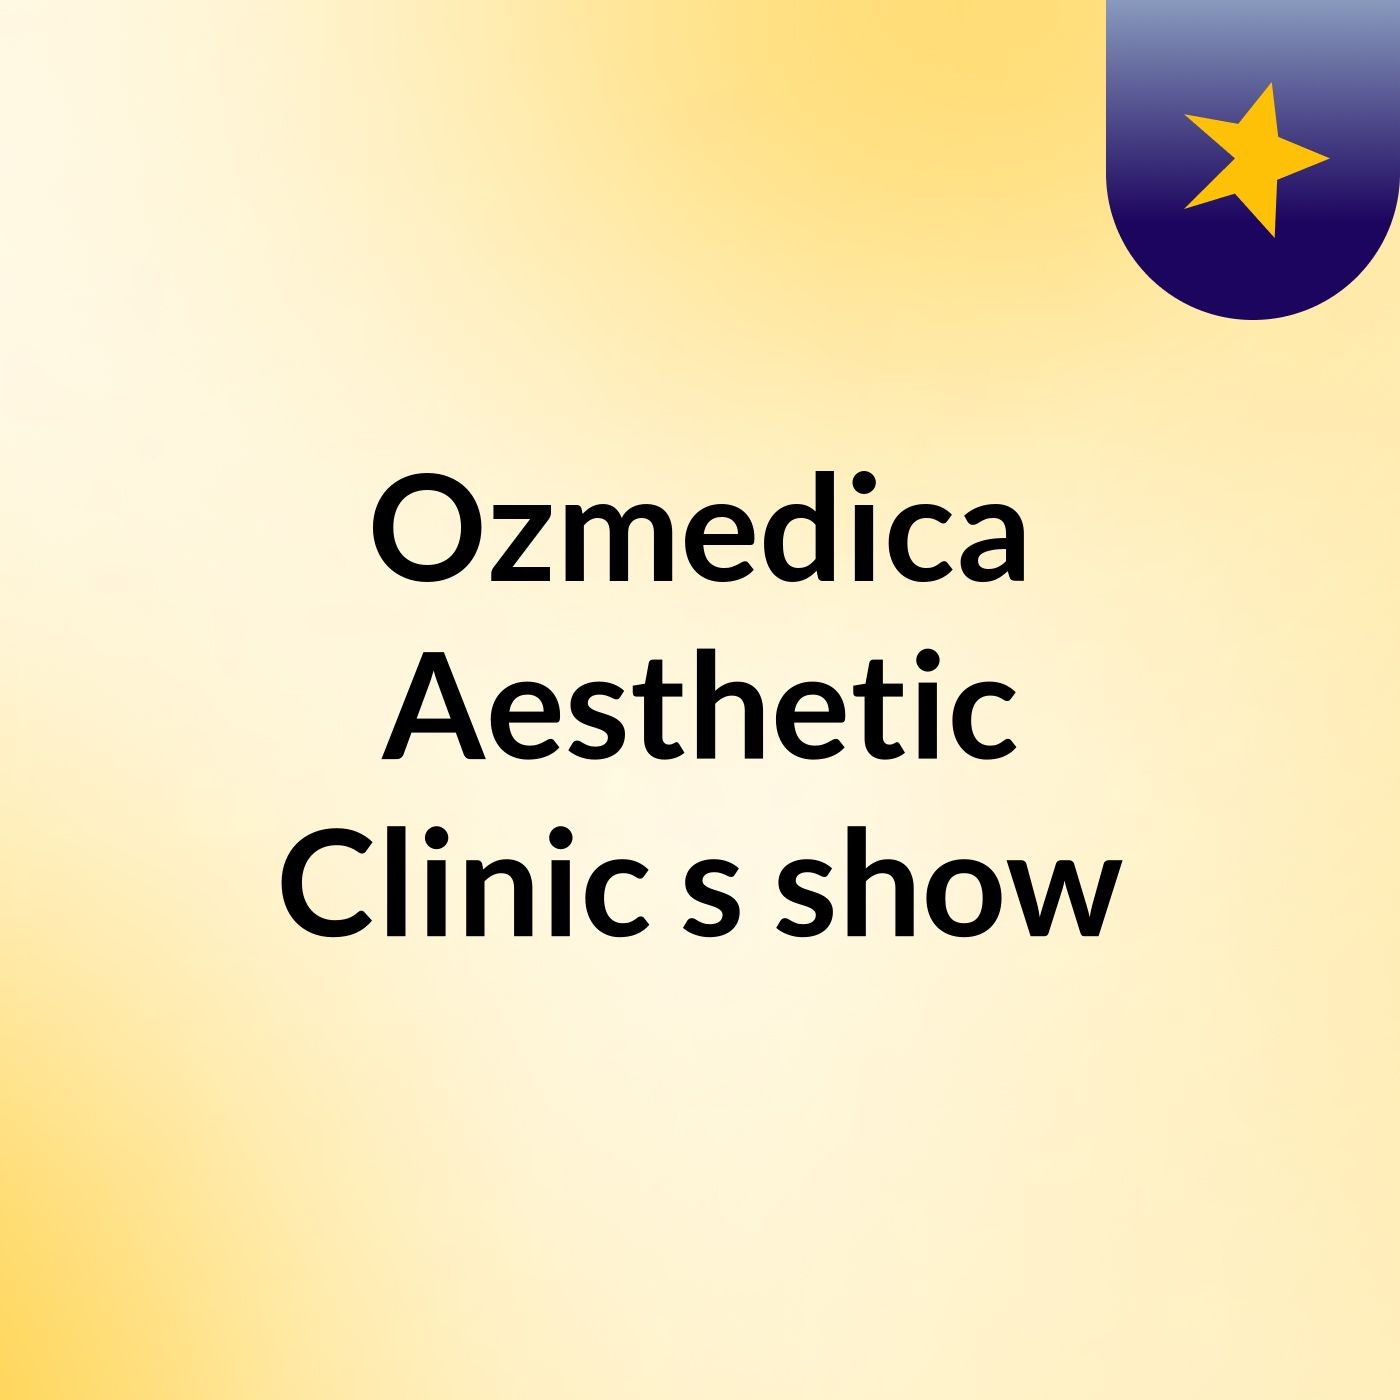 Enhance your Skin w/ Microdermabrasion Treatment from Ozmedica Aesthetic Clinic